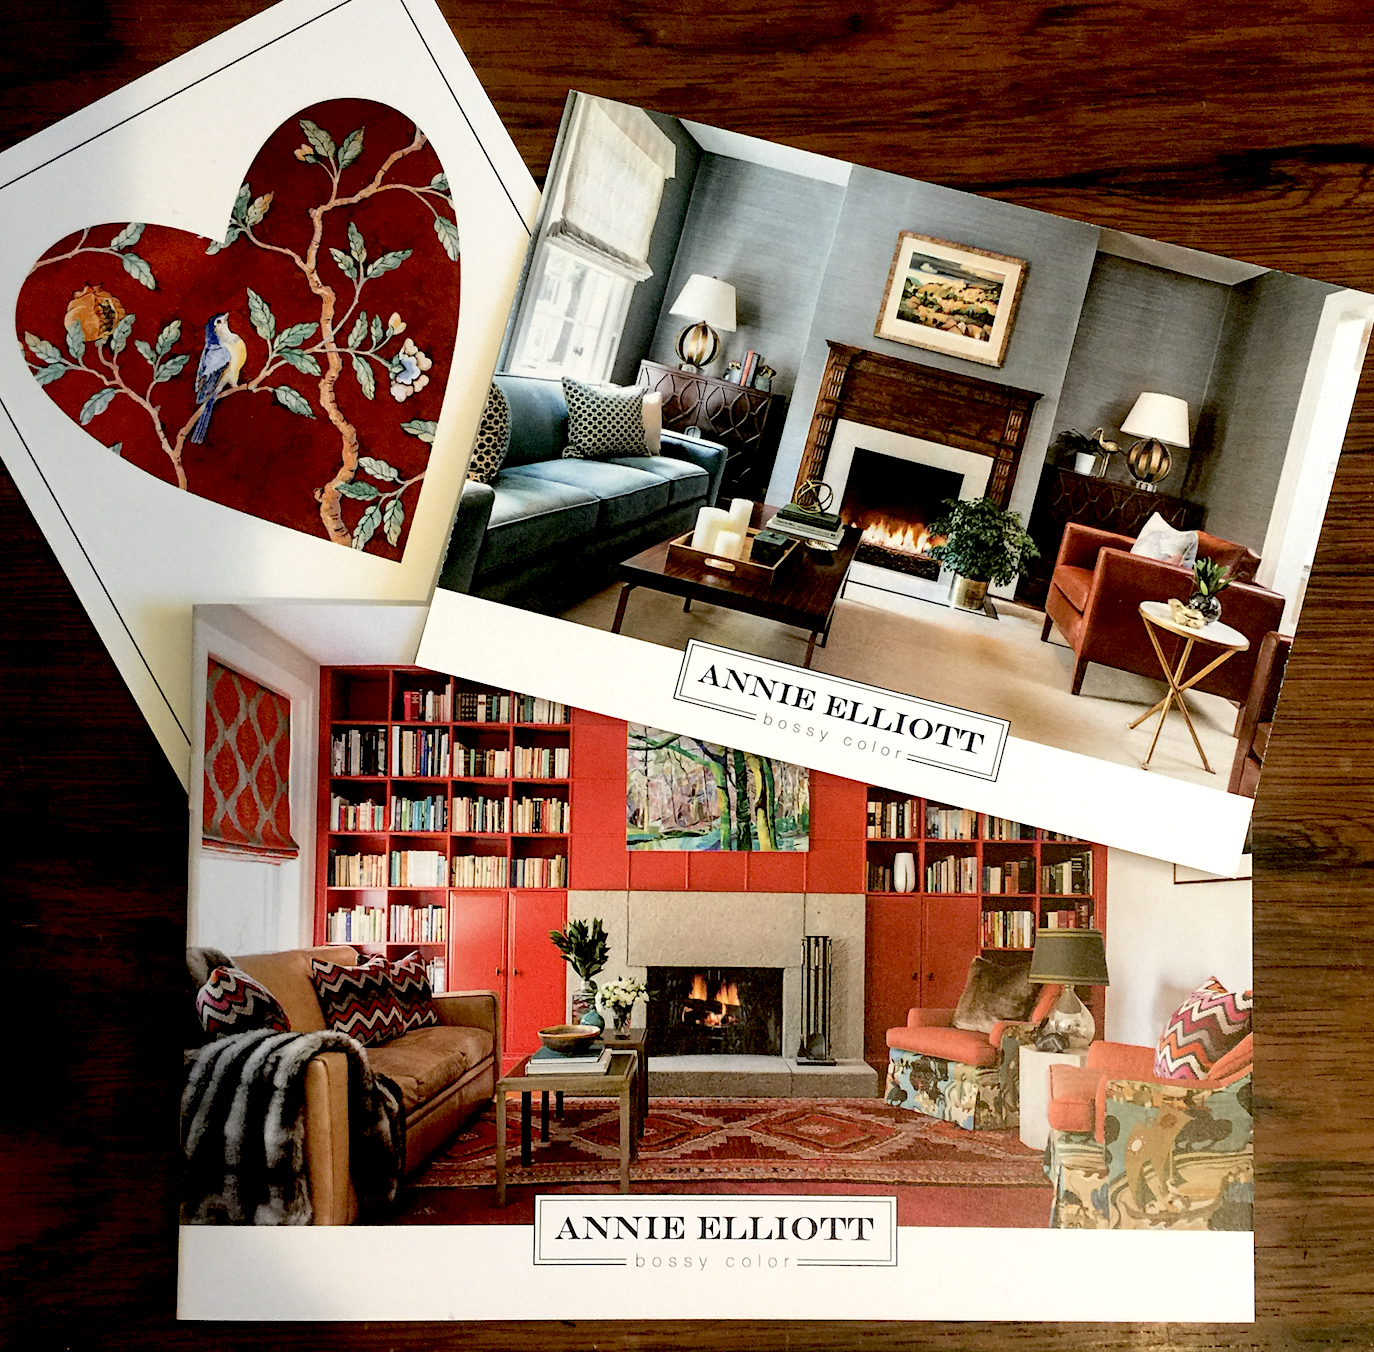 Annie Elliott bossy color brochure and postcards